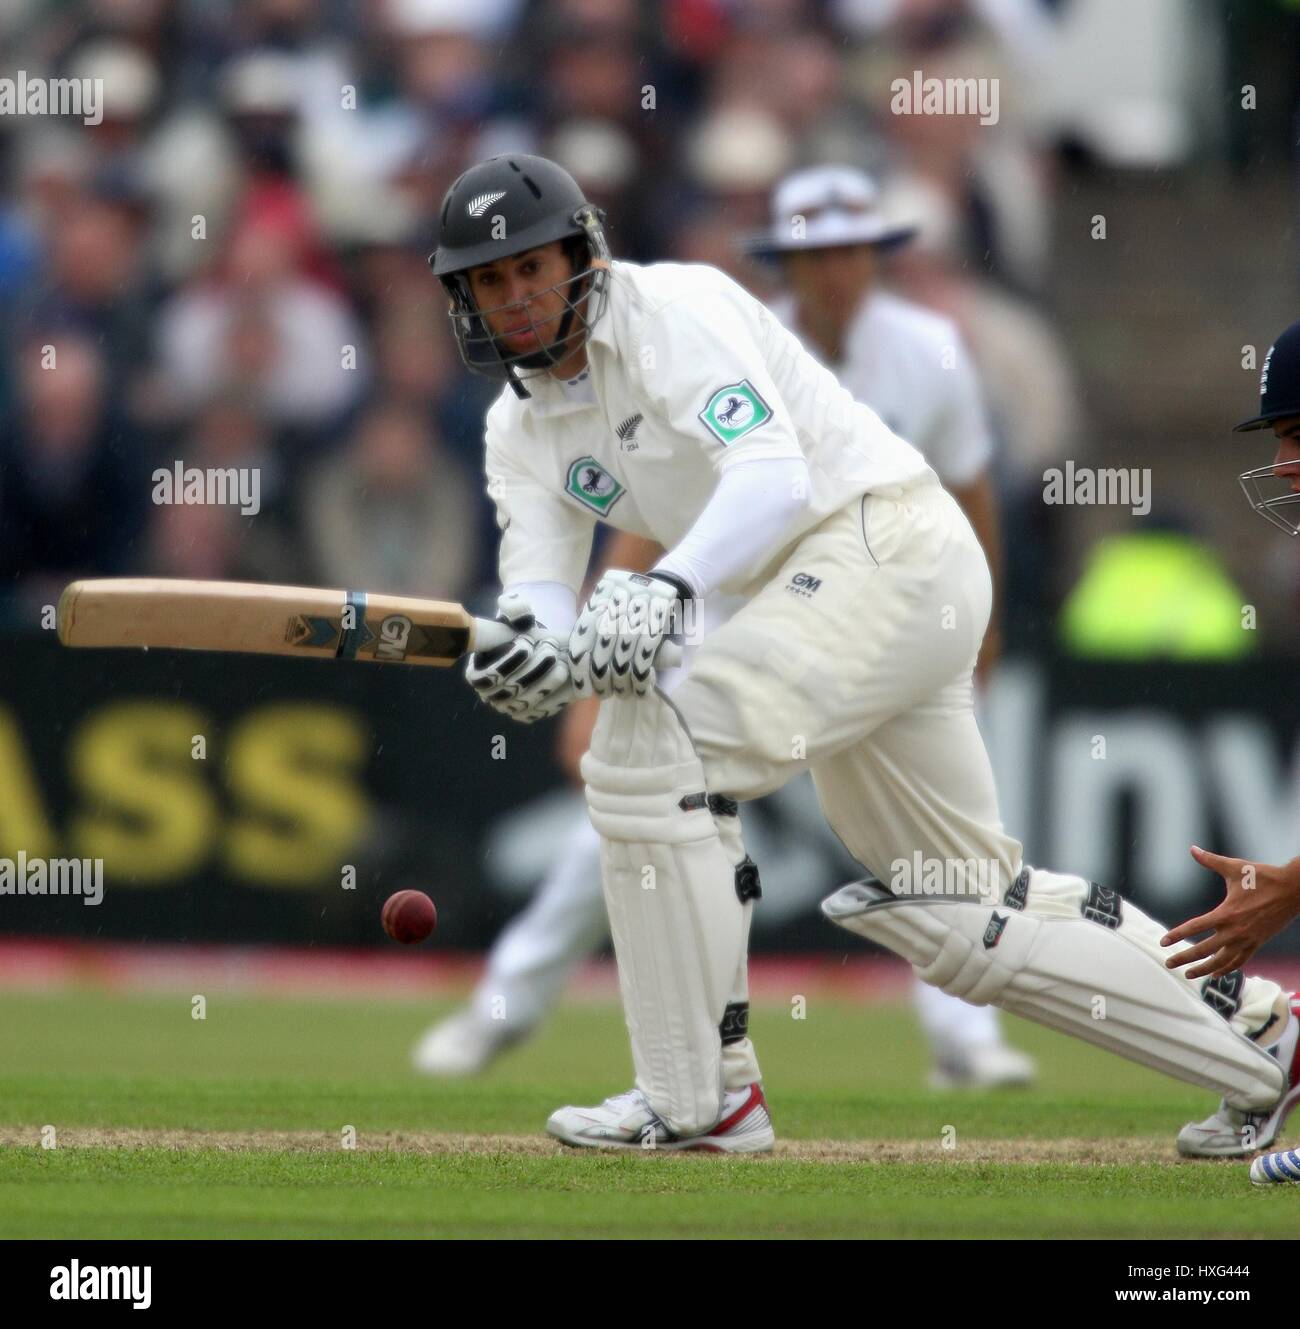 ROSS TAYLOR NEW ZEALAND OLD TRAFFORD MANCHESTER ENGALND 23 May 2008 Stock Photo